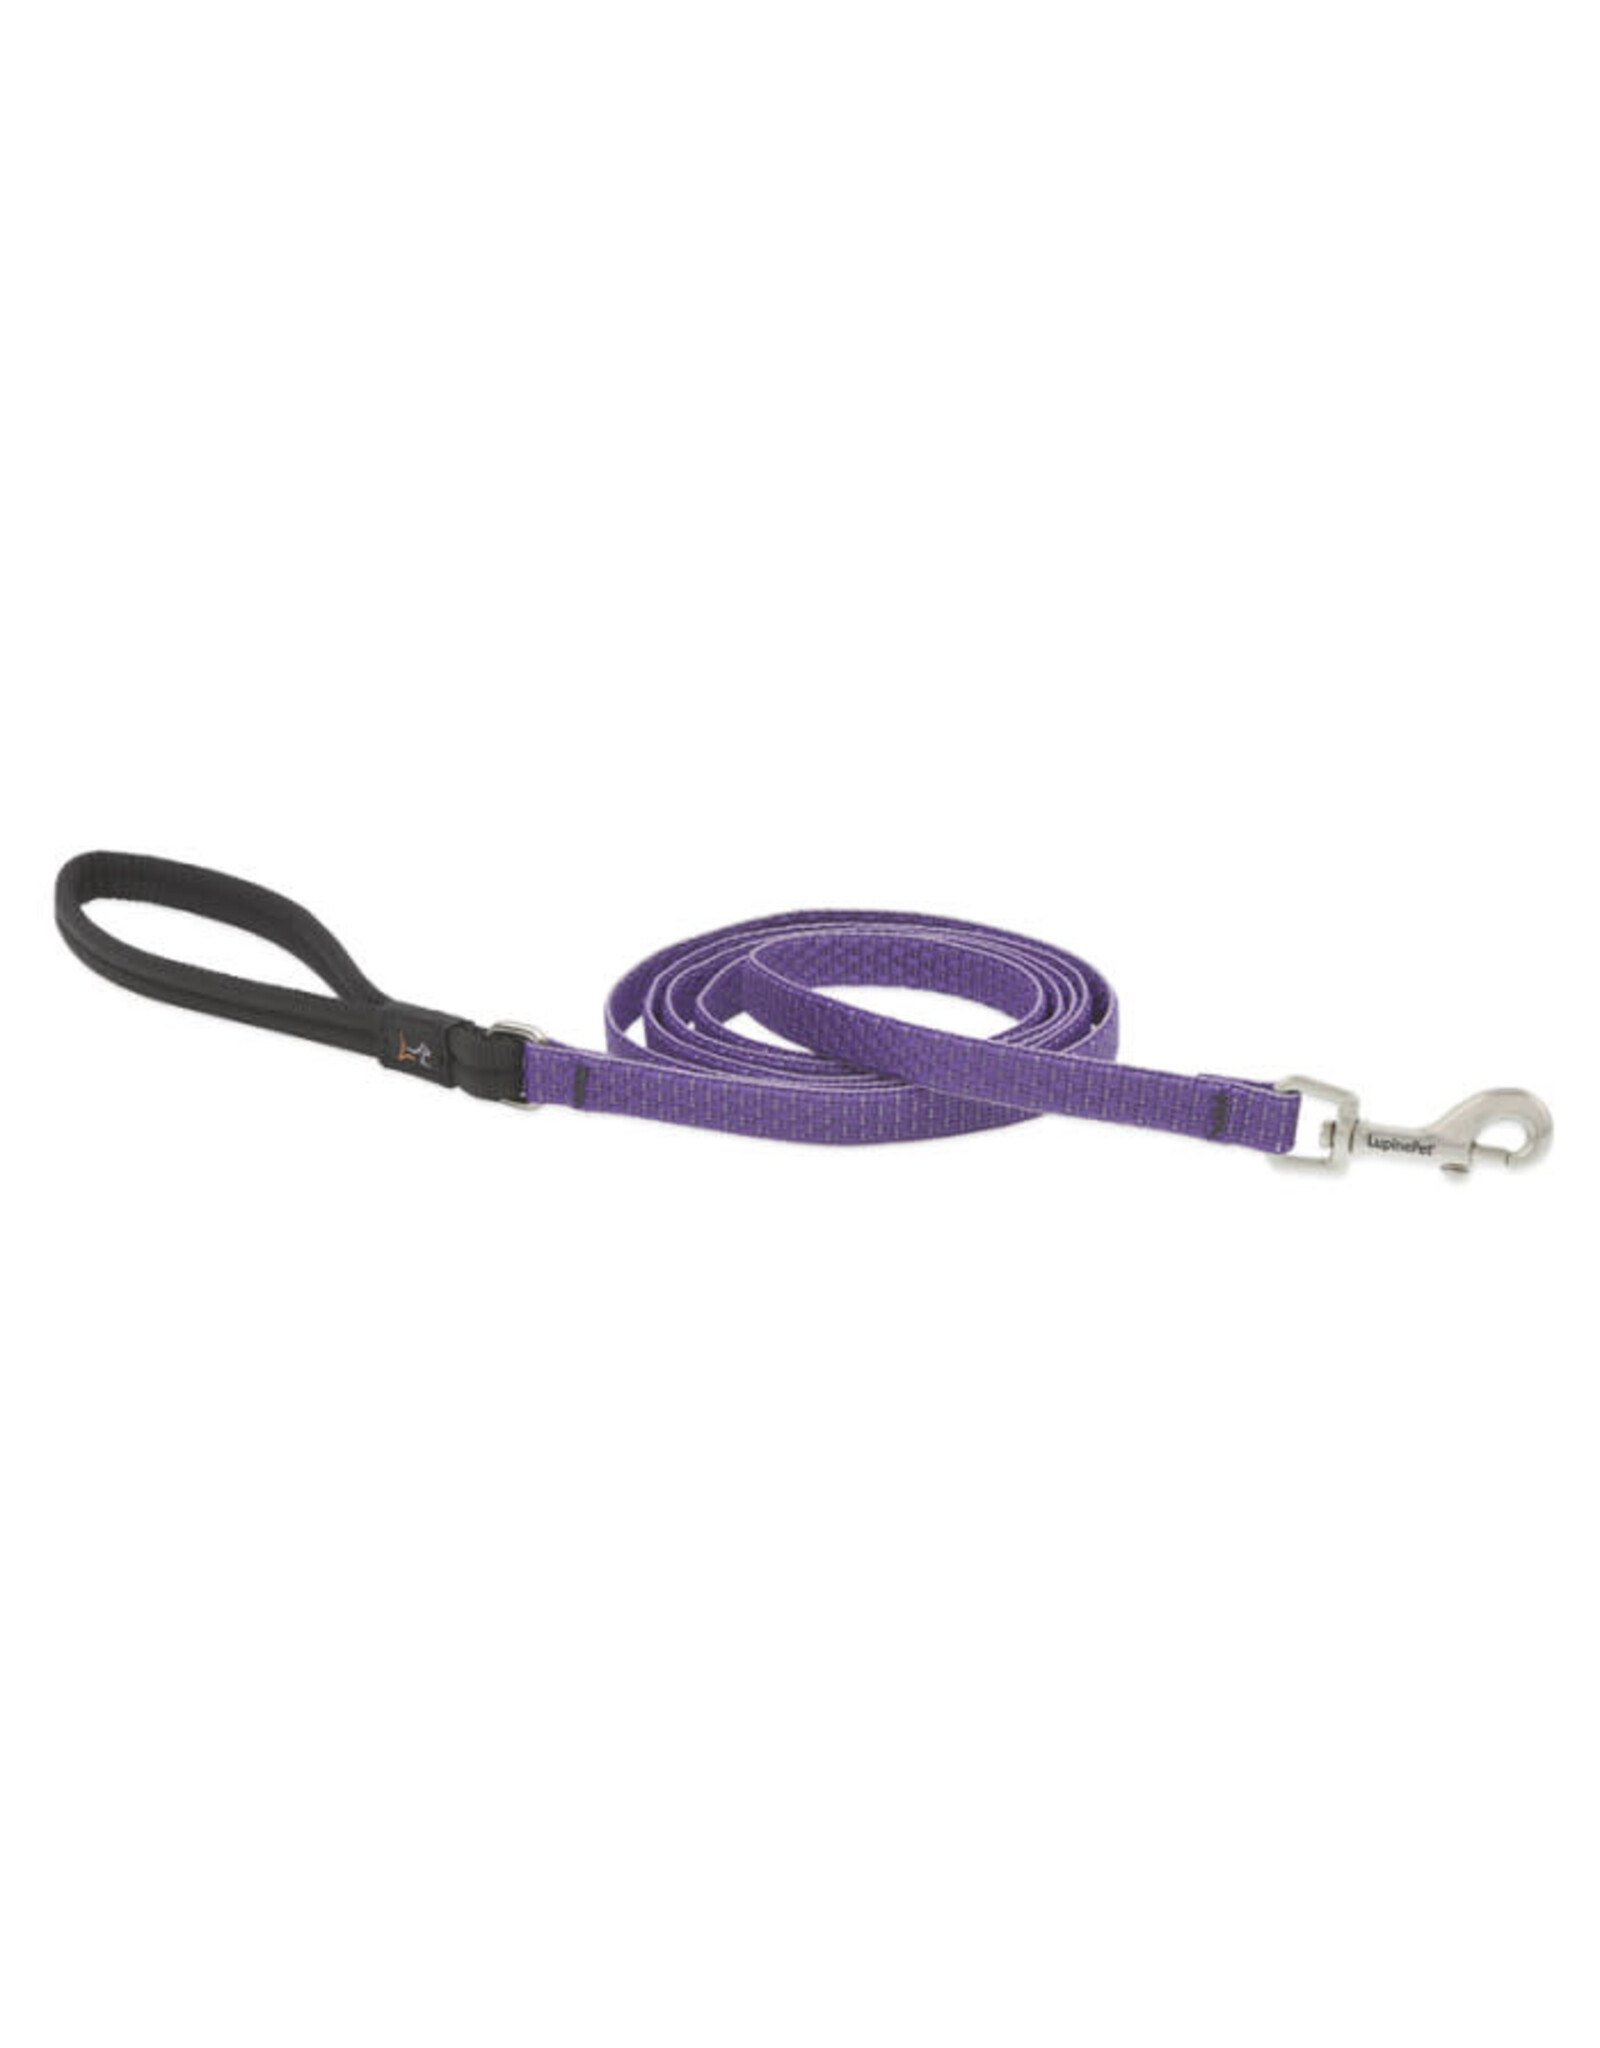 LUPINE LUPINE 3/4IN LILAC LEASH 6FT